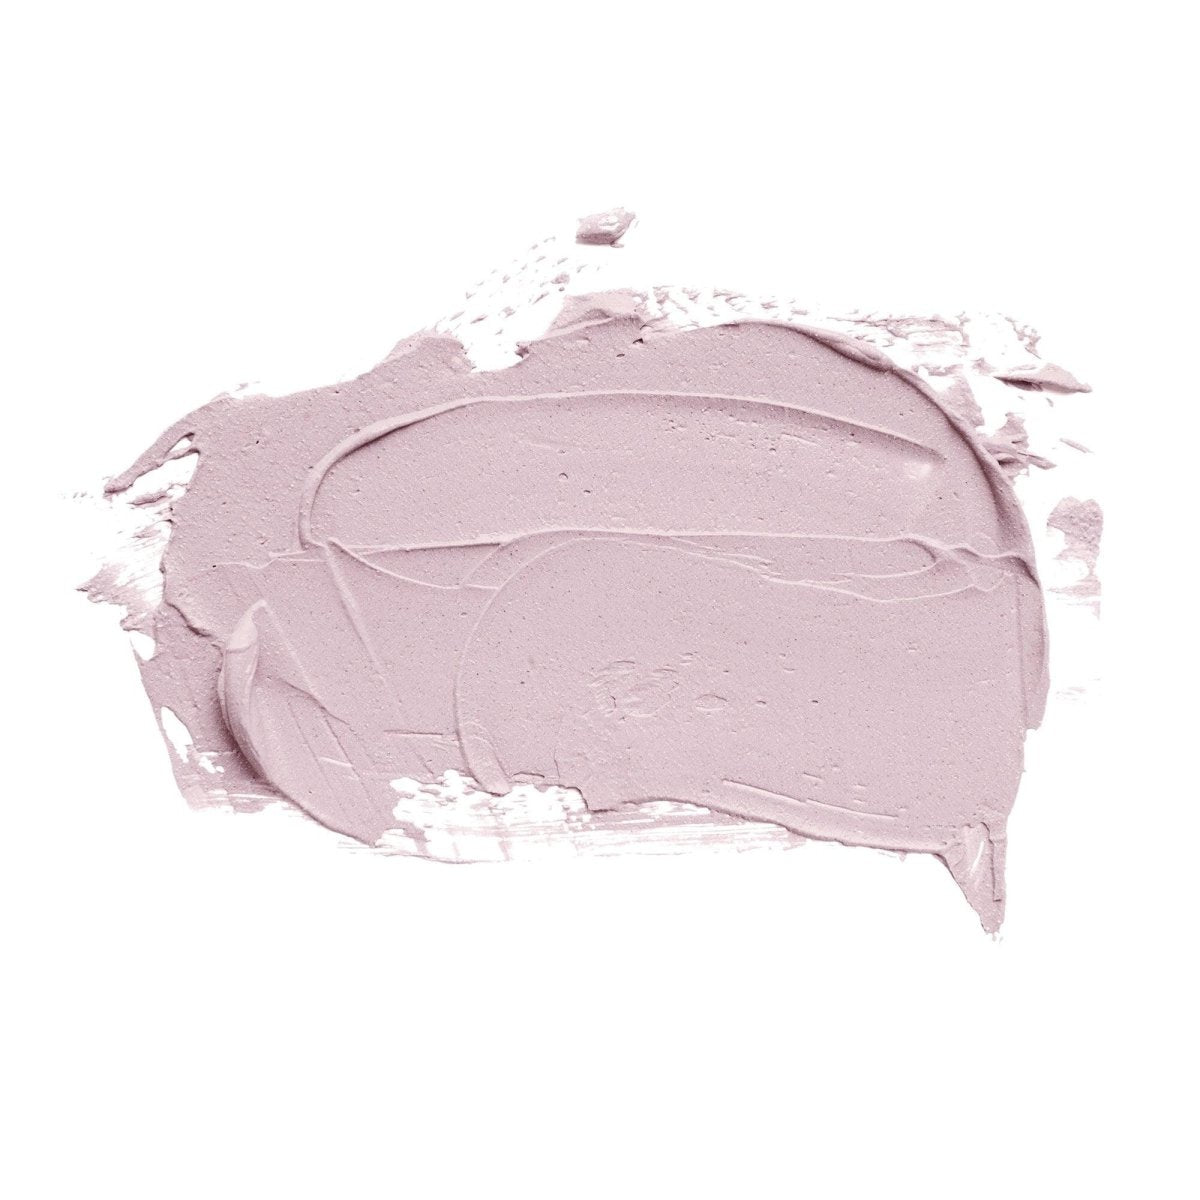 Texture of the pink clay mask for oily skin